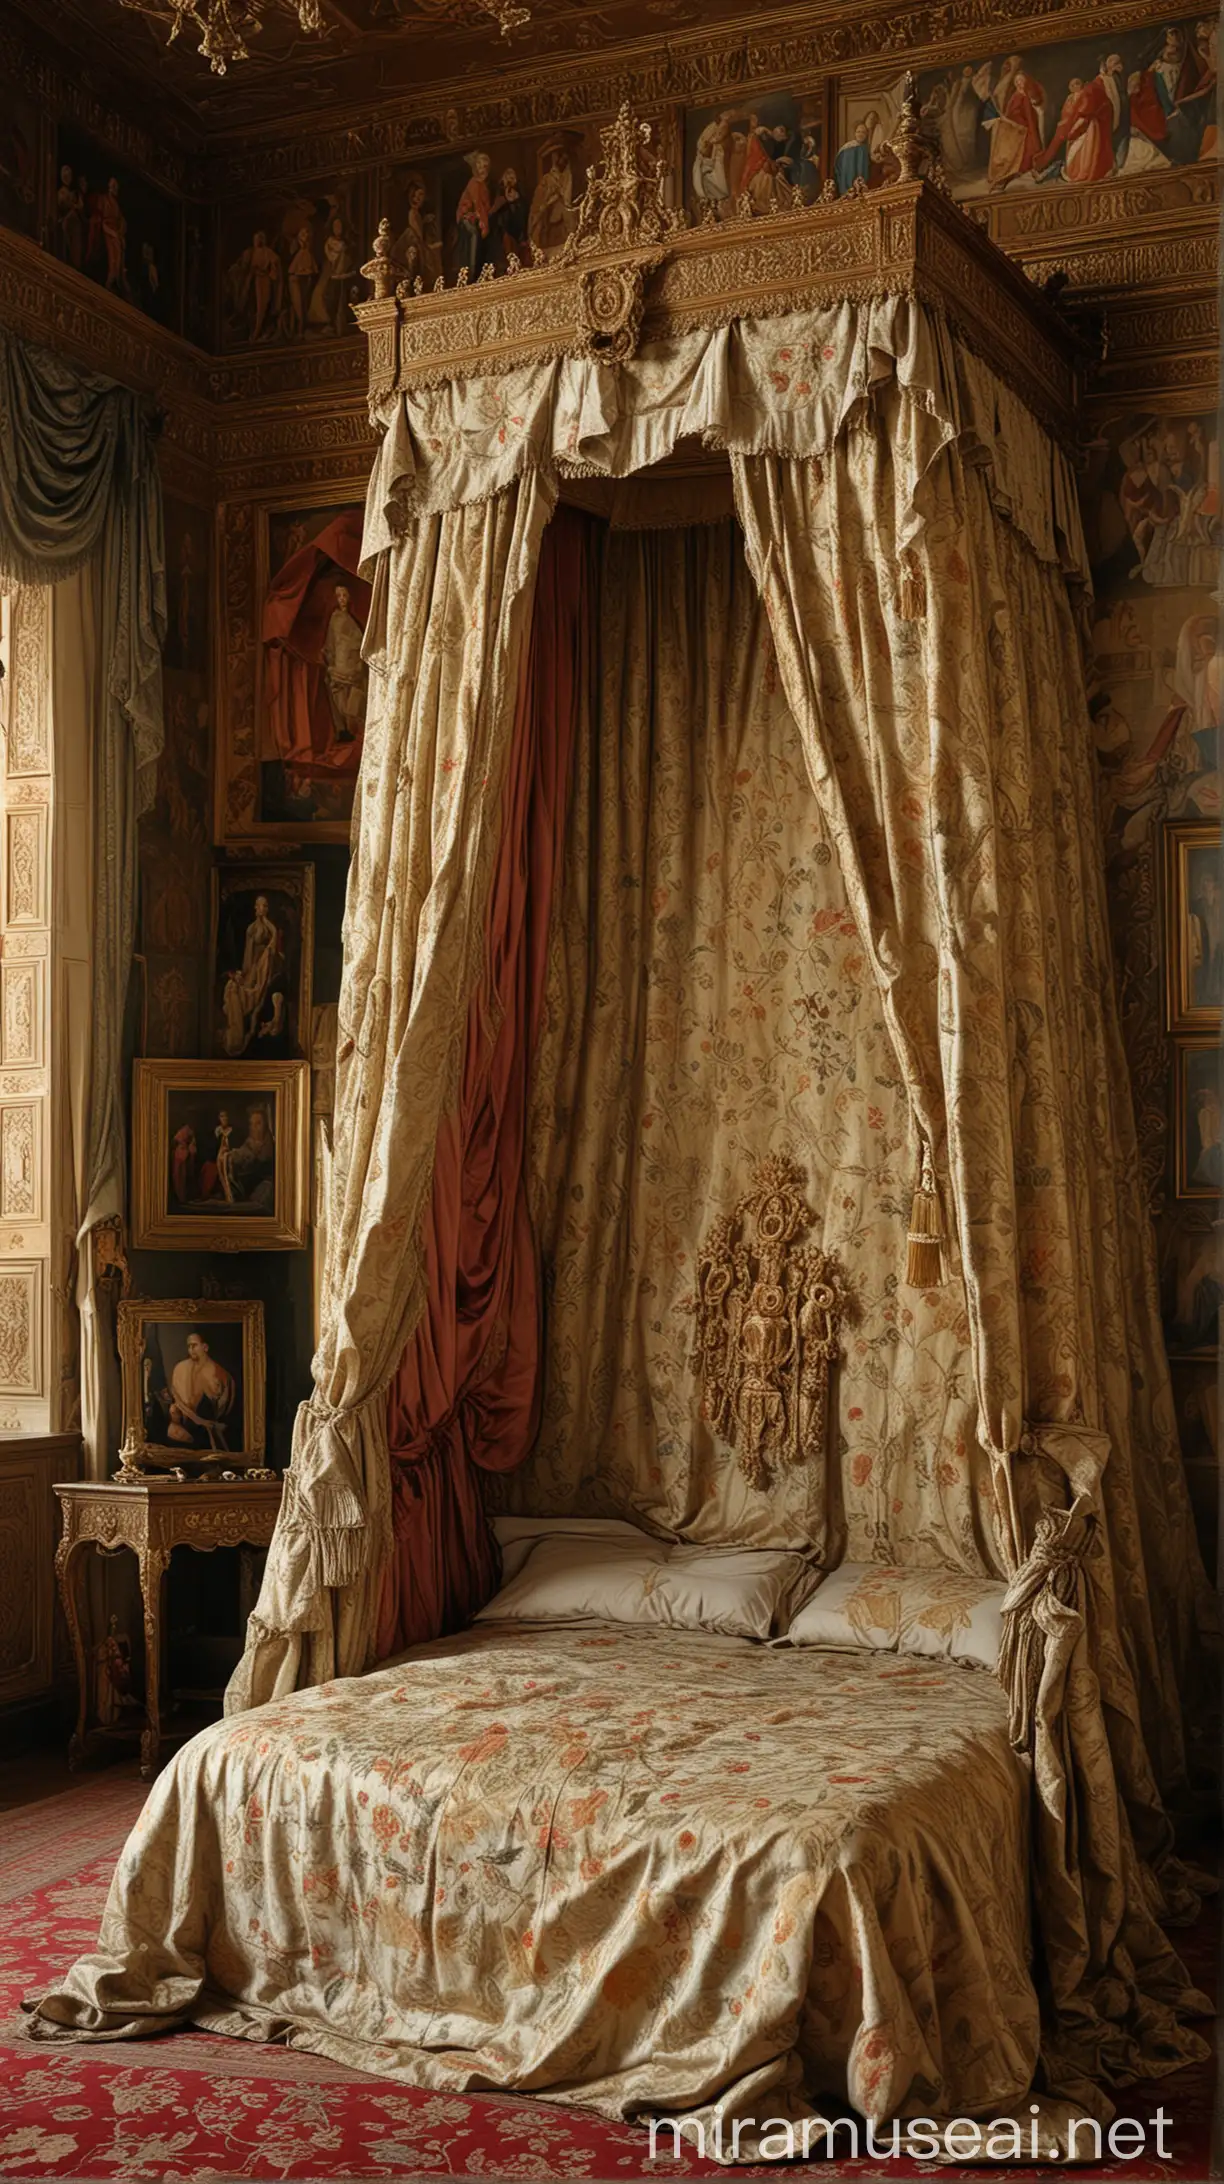 Ferdinand VII of Spain is depicted in a grand Spanish royal bedroom, the bed draped with luxurious silks and brocades. He is shown in a subtly suggestive manner to hint at his rumored large endowment. The queen lies on the bed, appearing pale and distressed, suggesting the rumored cause of her demise. The room is adorned with classic Spanish decor, featuring rich woodwork and religious artifacts.
